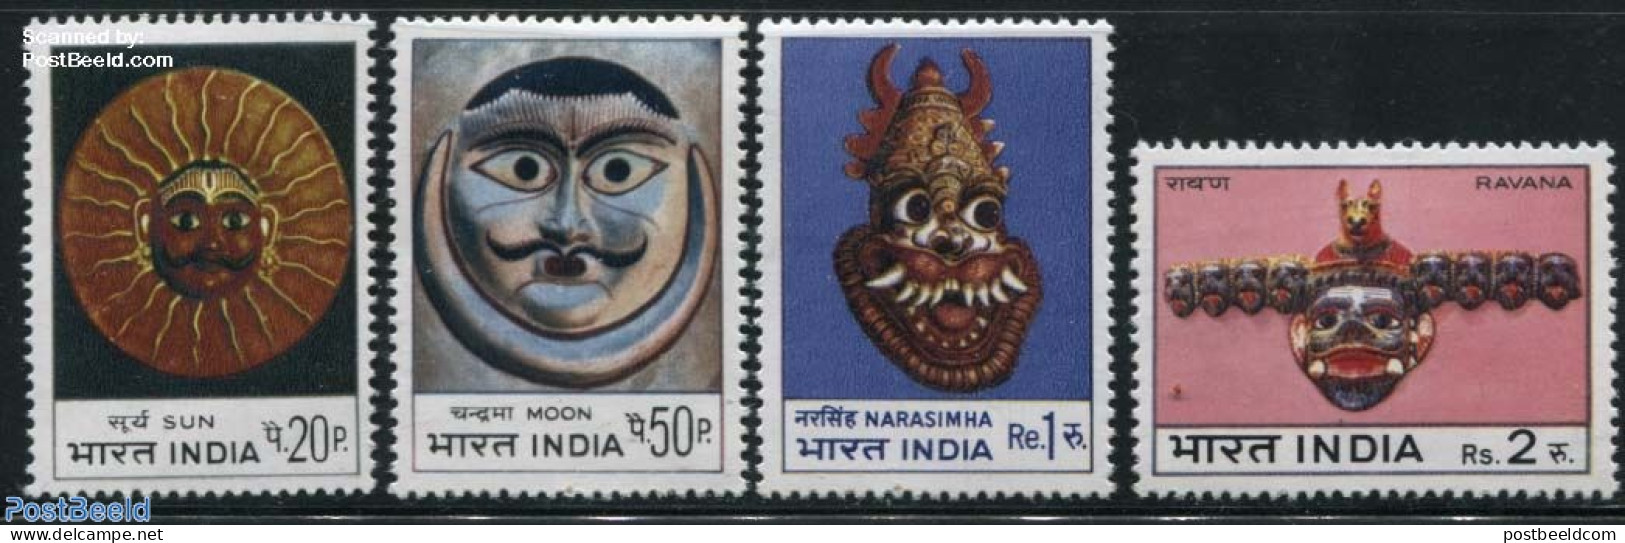 India 1974 Masks 4v, Mint NH, Art - Art & Antique Objects - Unused Stamps